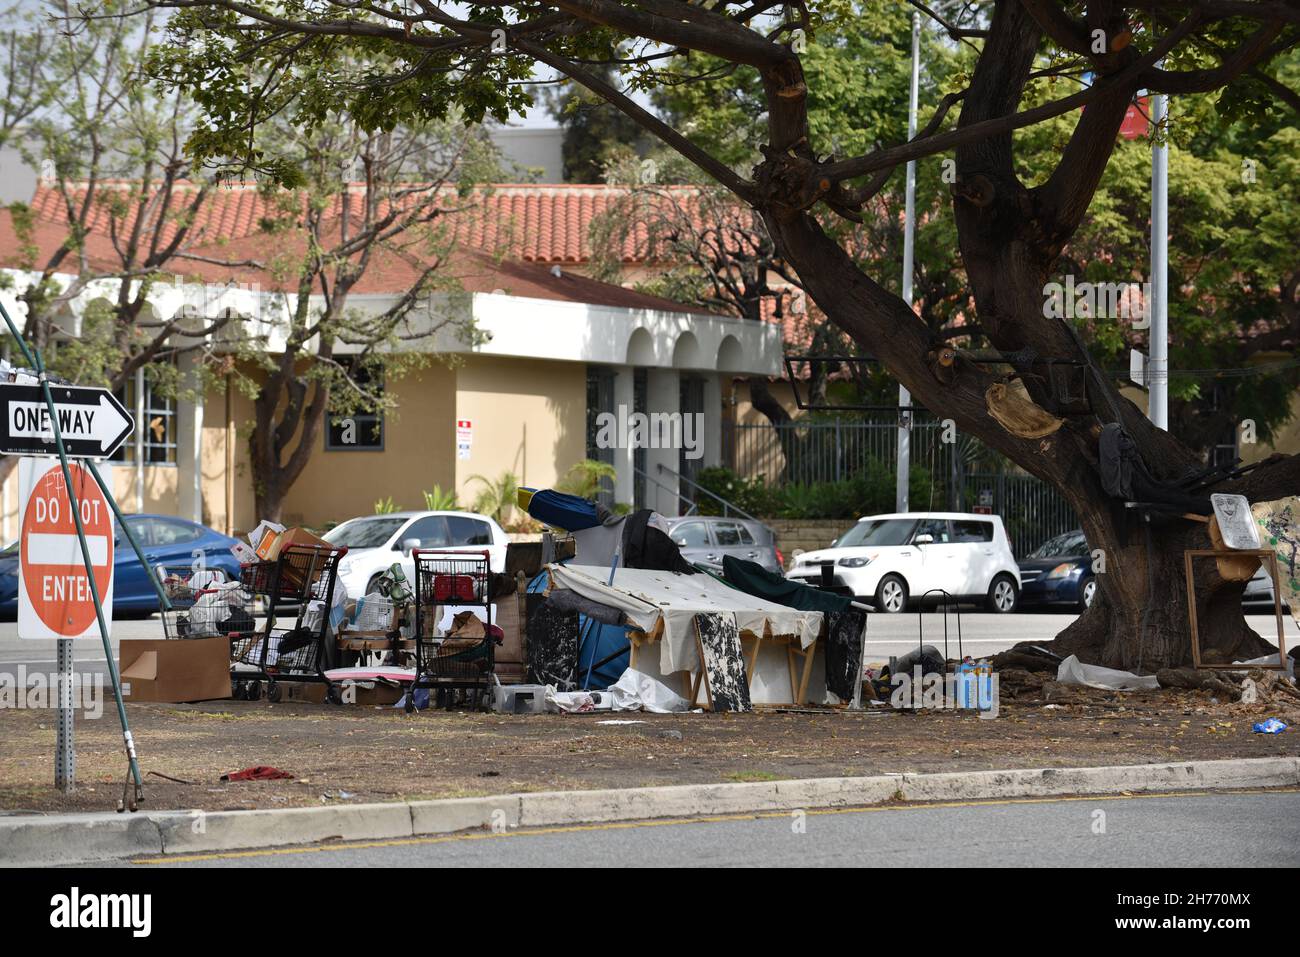 Beverly Hills, CA USA - October 22, 2021: Homeless encampment in Beverly Hills in front of an upscale office building Stock Photo